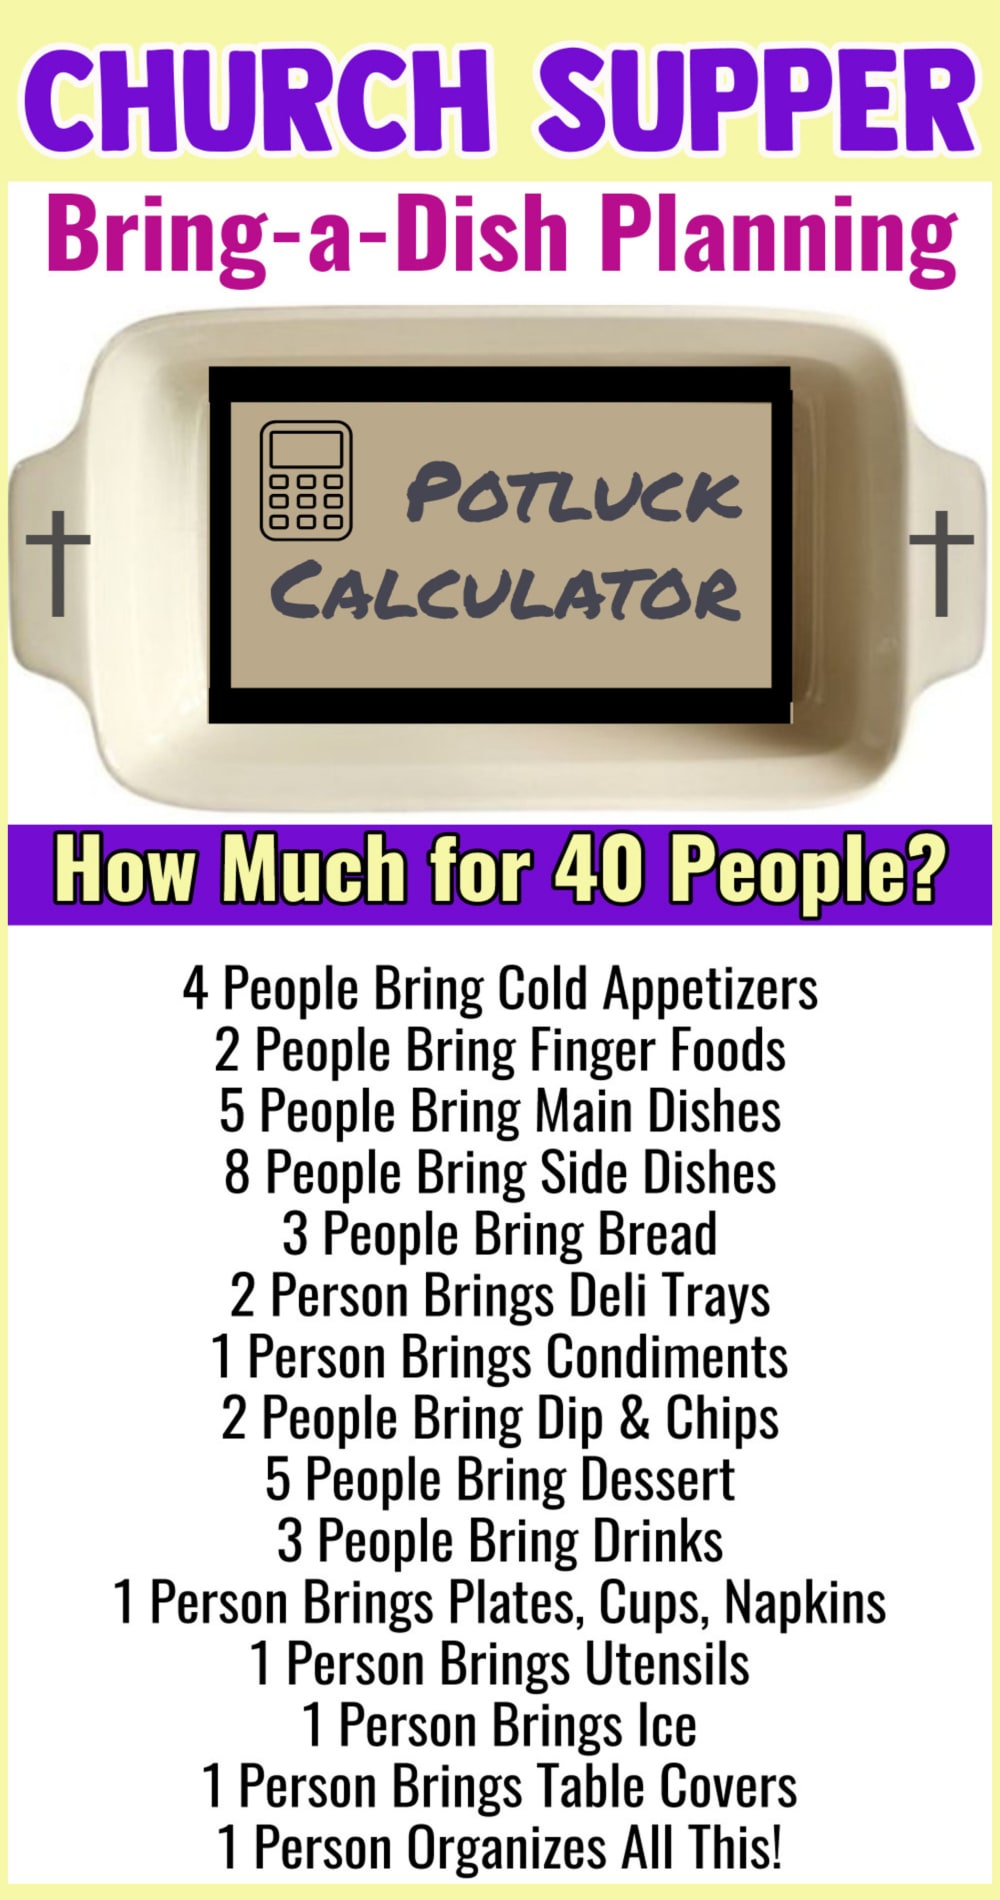 church supper potluck calculator - how much food do you need